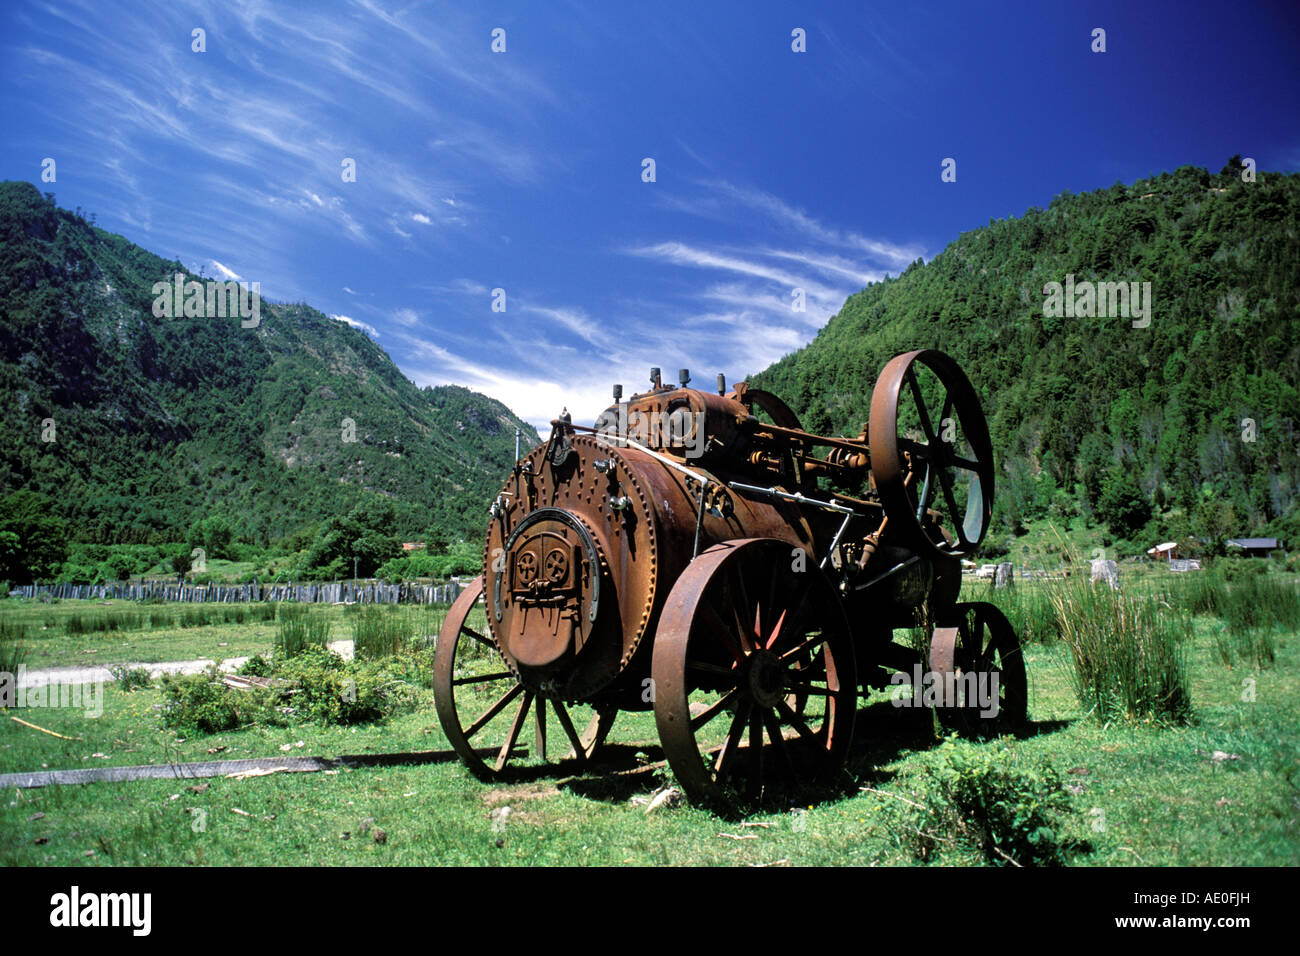 A19th Century British steam engine used to power farm equipment lies abandoned in a field in Chile, South America Stock Photo